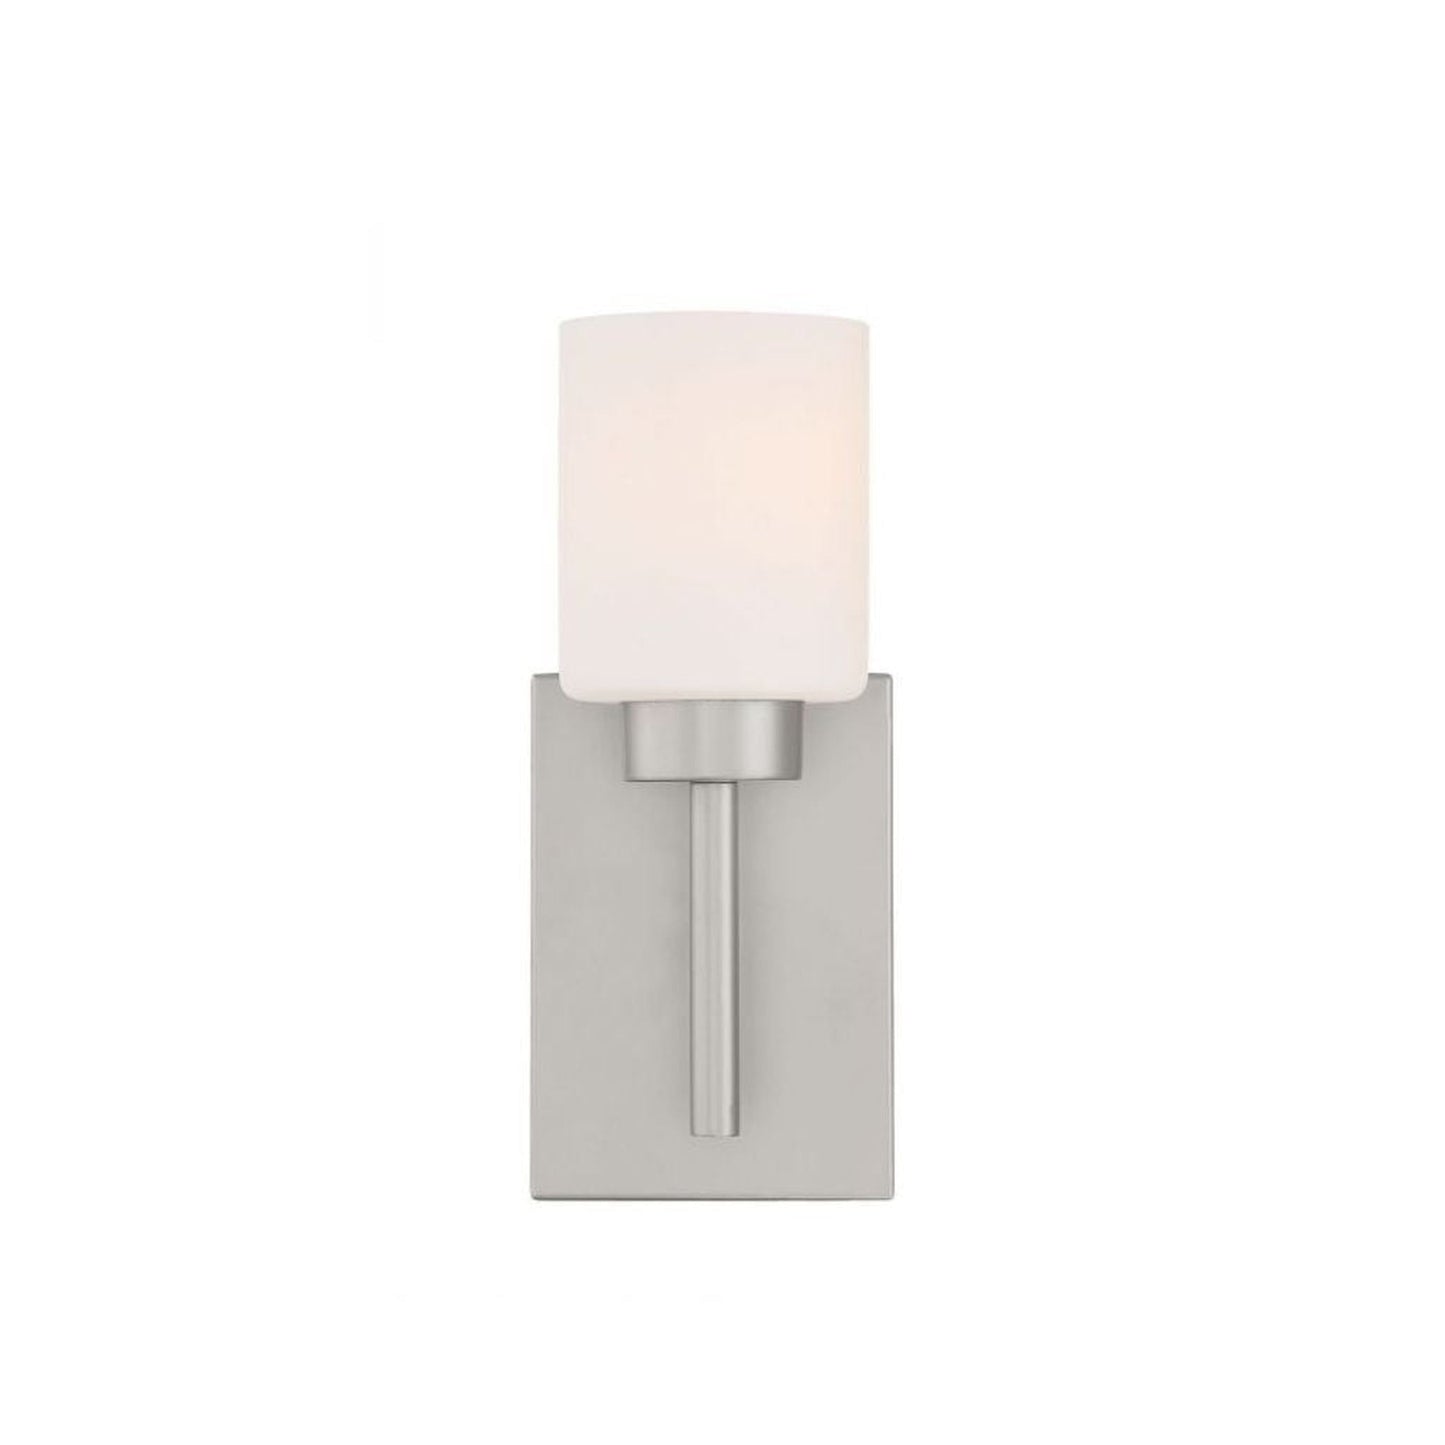 Craftmade Cadence 5" x 11" 1-Light Satin Nickel Wall Sconce With White Frosted Glass Shade